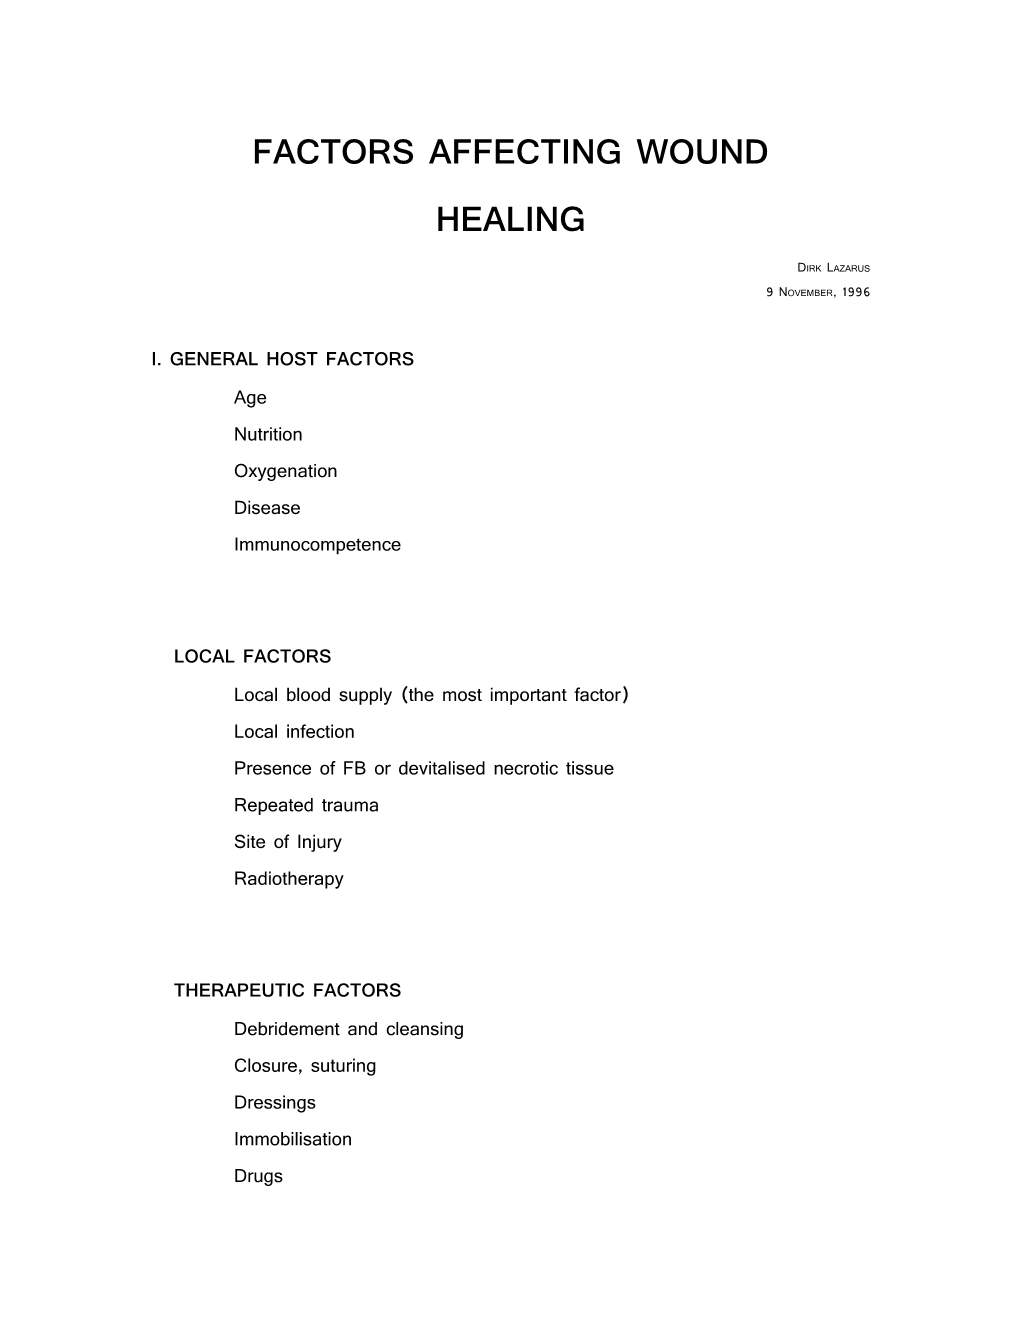 Factors Affecting Wound